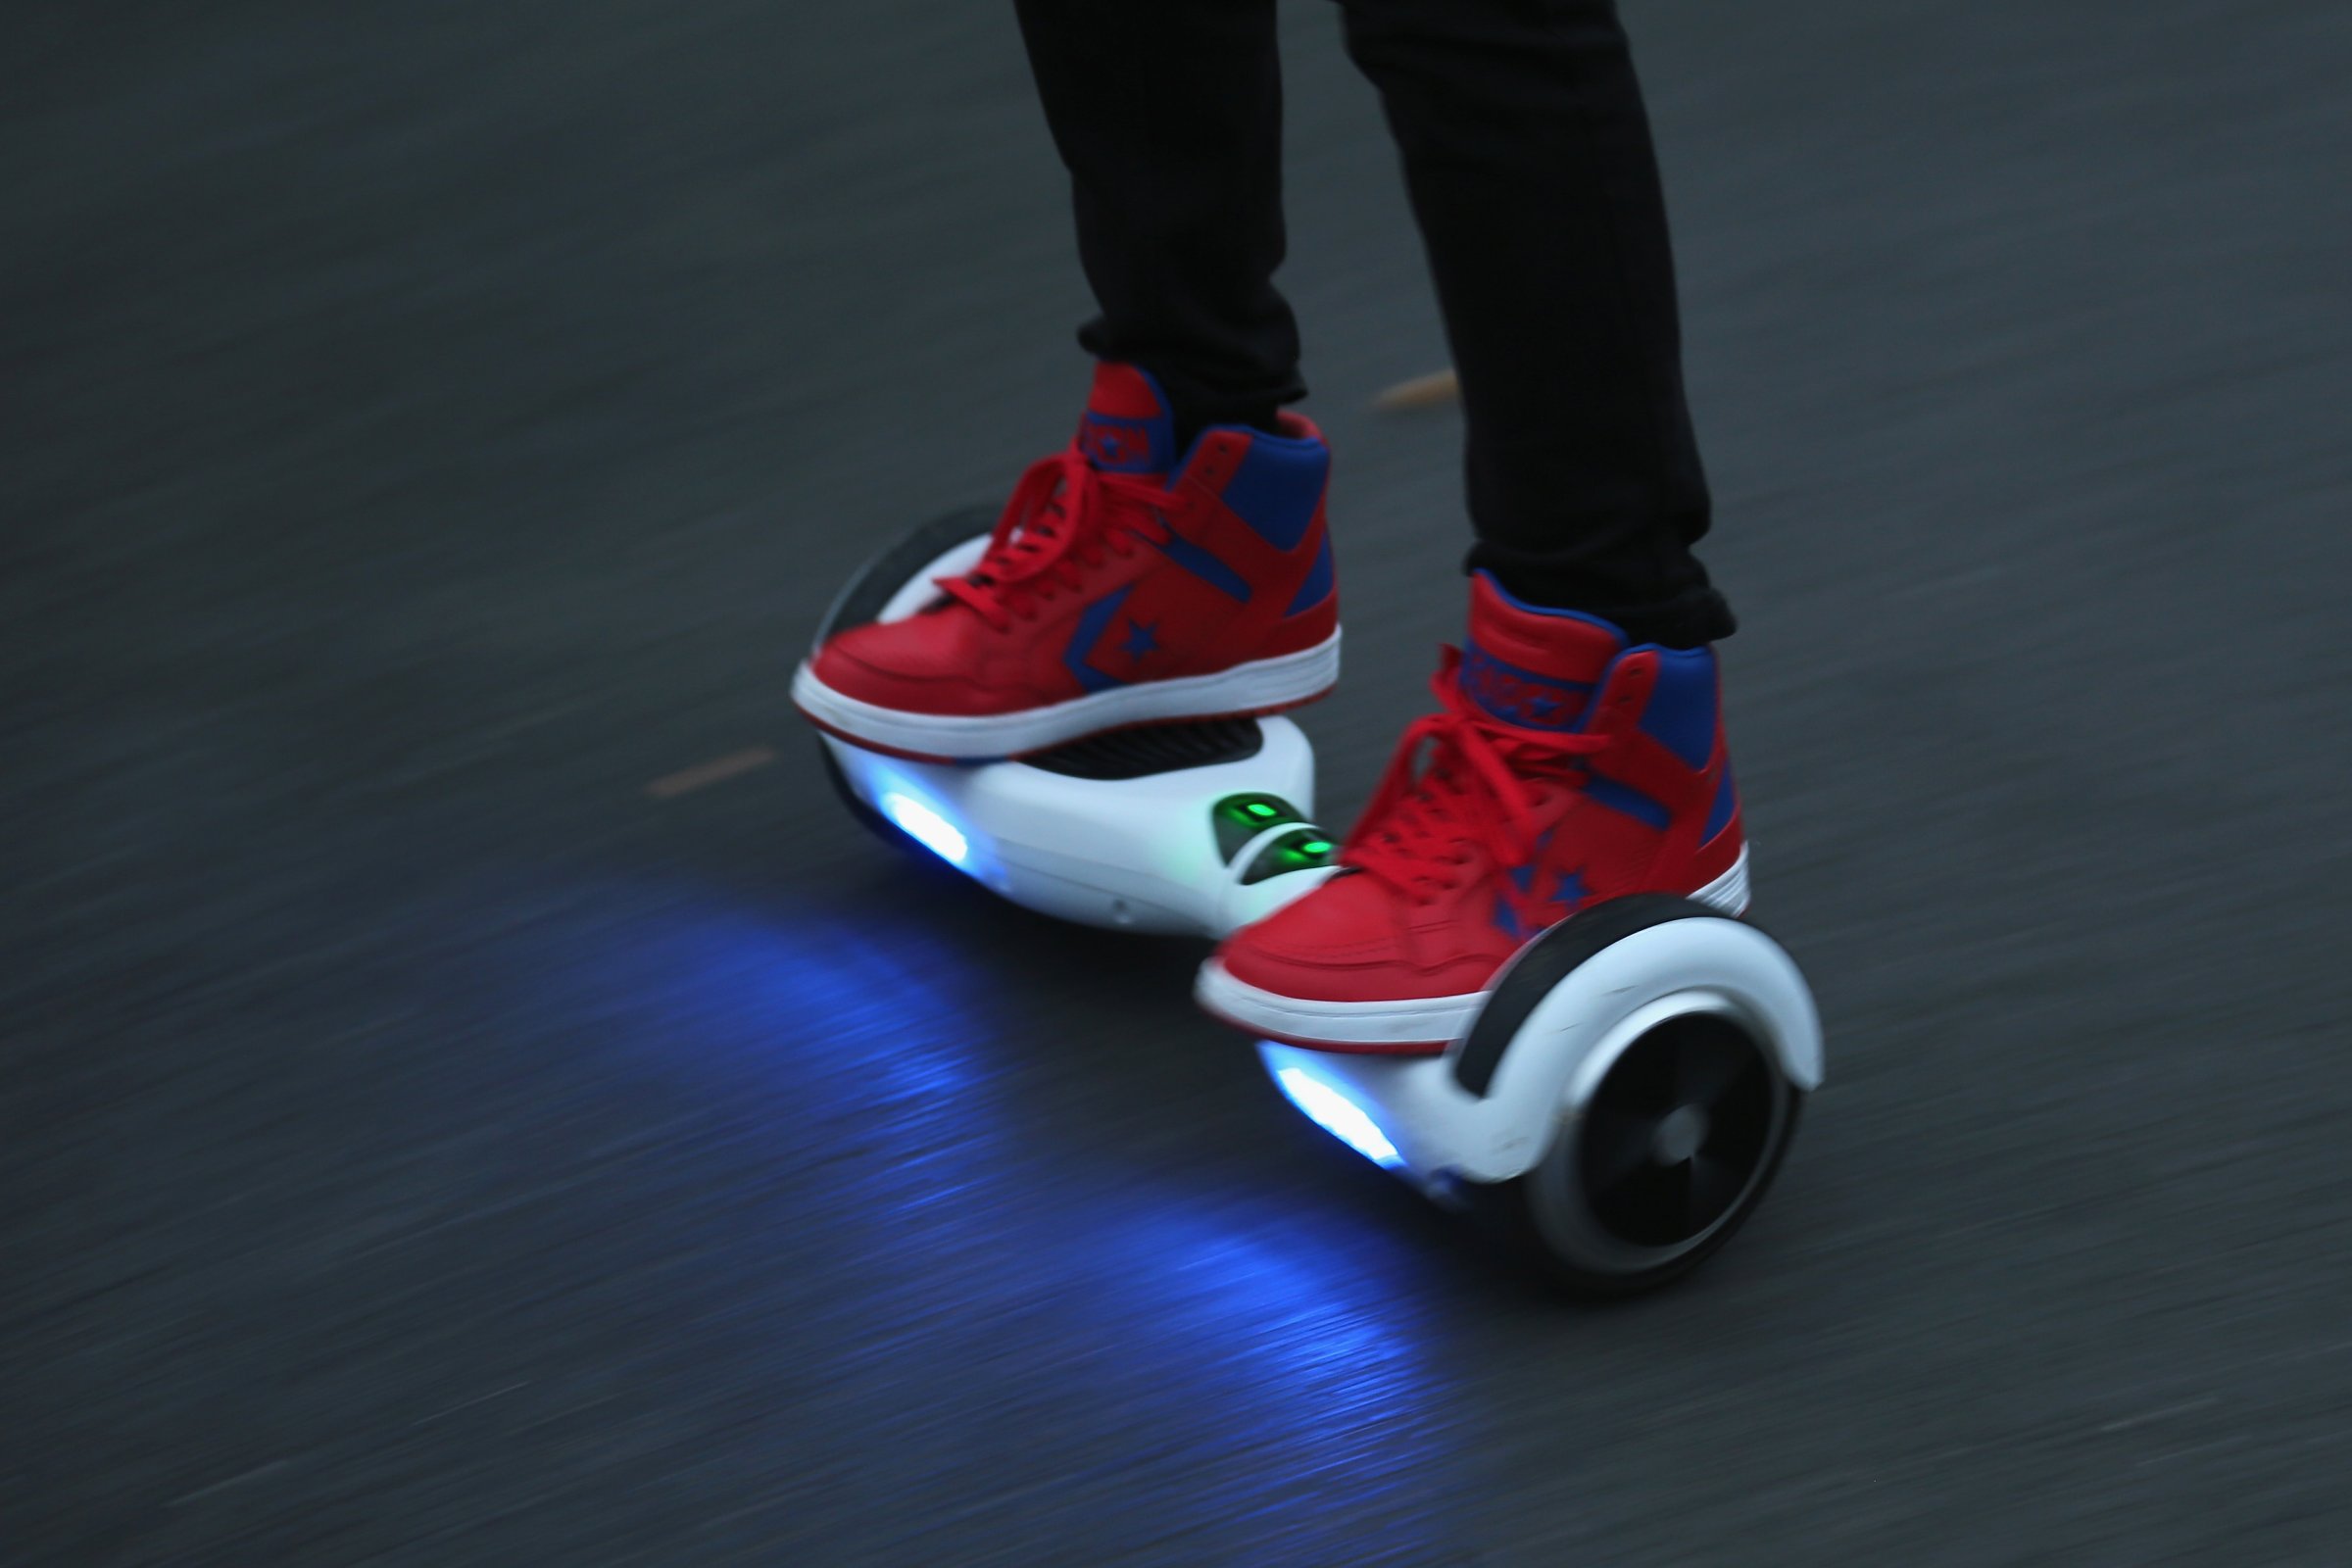 A youth poses as he rides a hoverboard, which are also known as self-balancing scooters and balance boards, on October 13, 2015 in Knutsford, England.The British Crown Prosecution Service have declared that the devices are illegal as they are are too unsafe to ride on the road, and too dangerous to ride on the pavement.